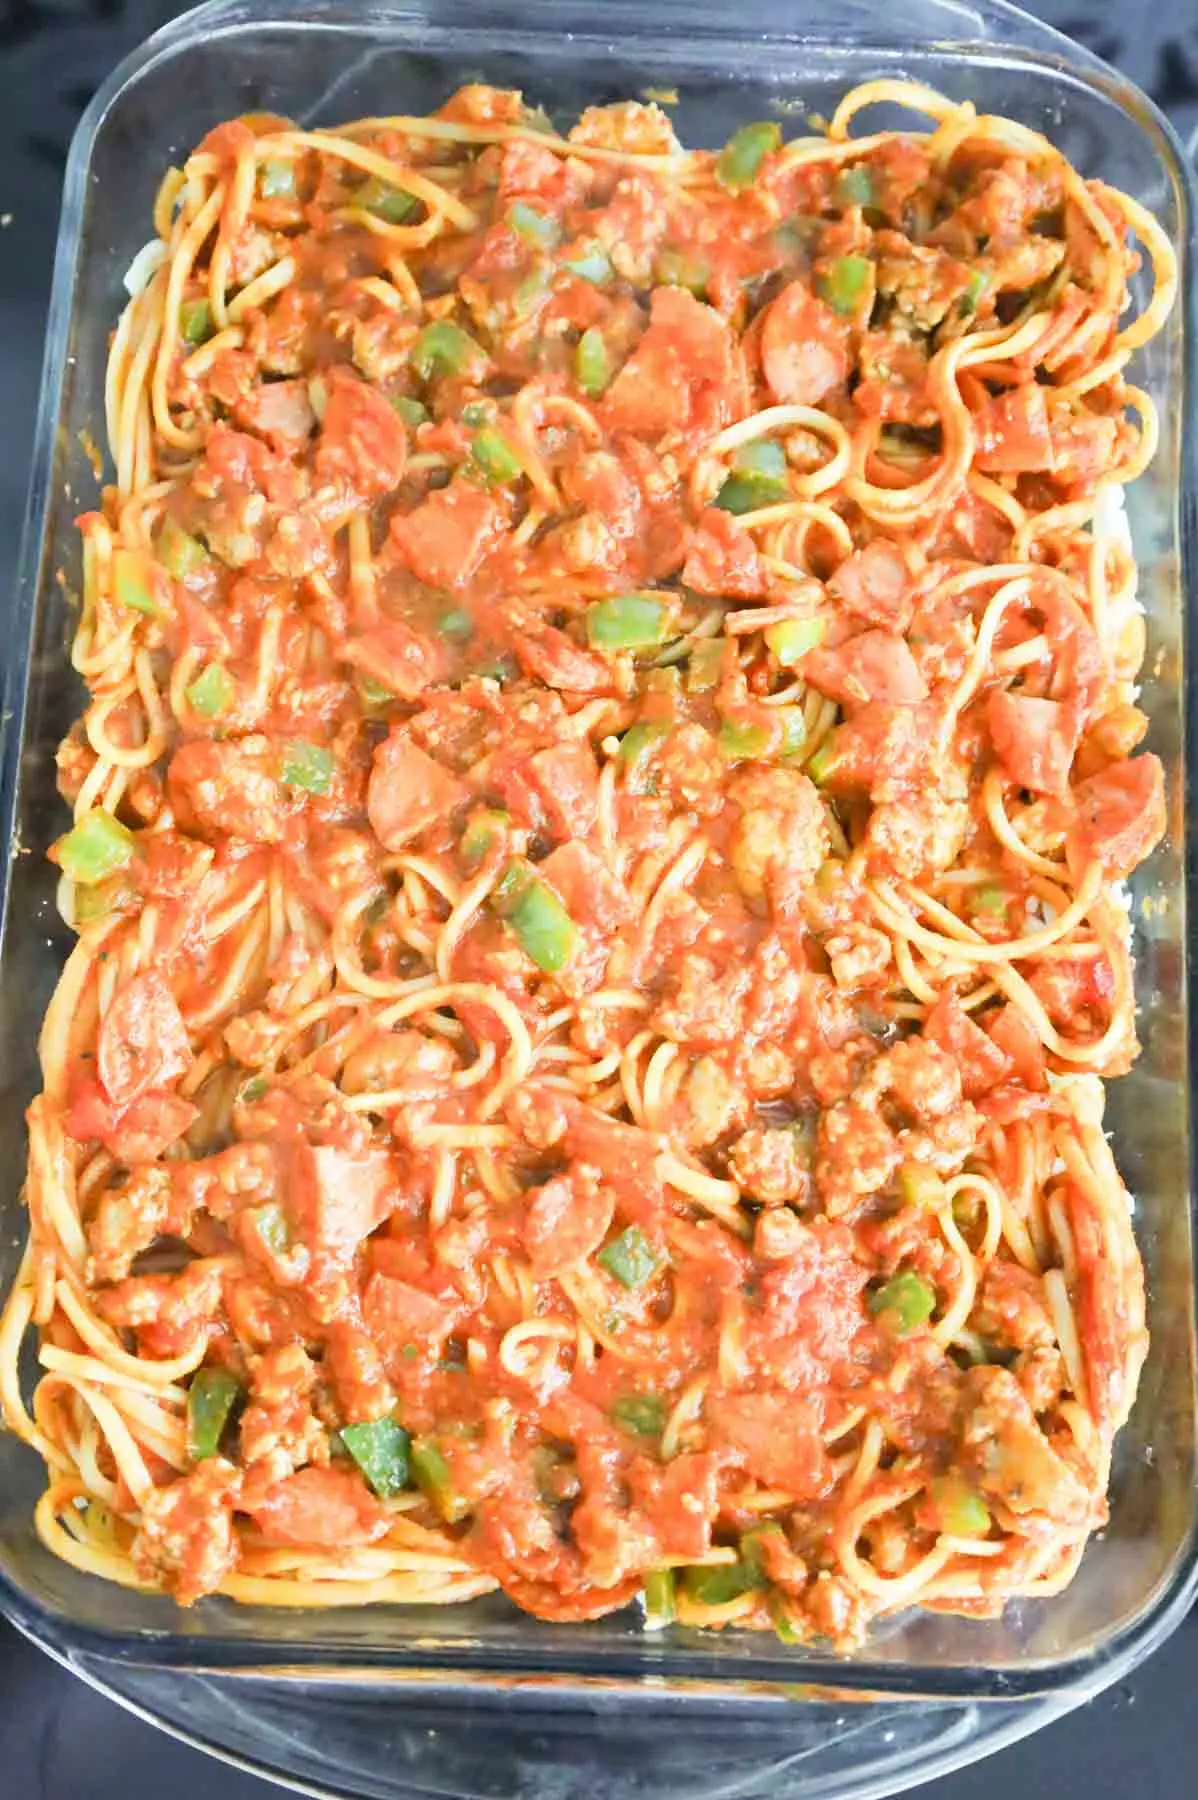 pepperoni, diced peppers and sausage spaghetti mixture in a baking dish